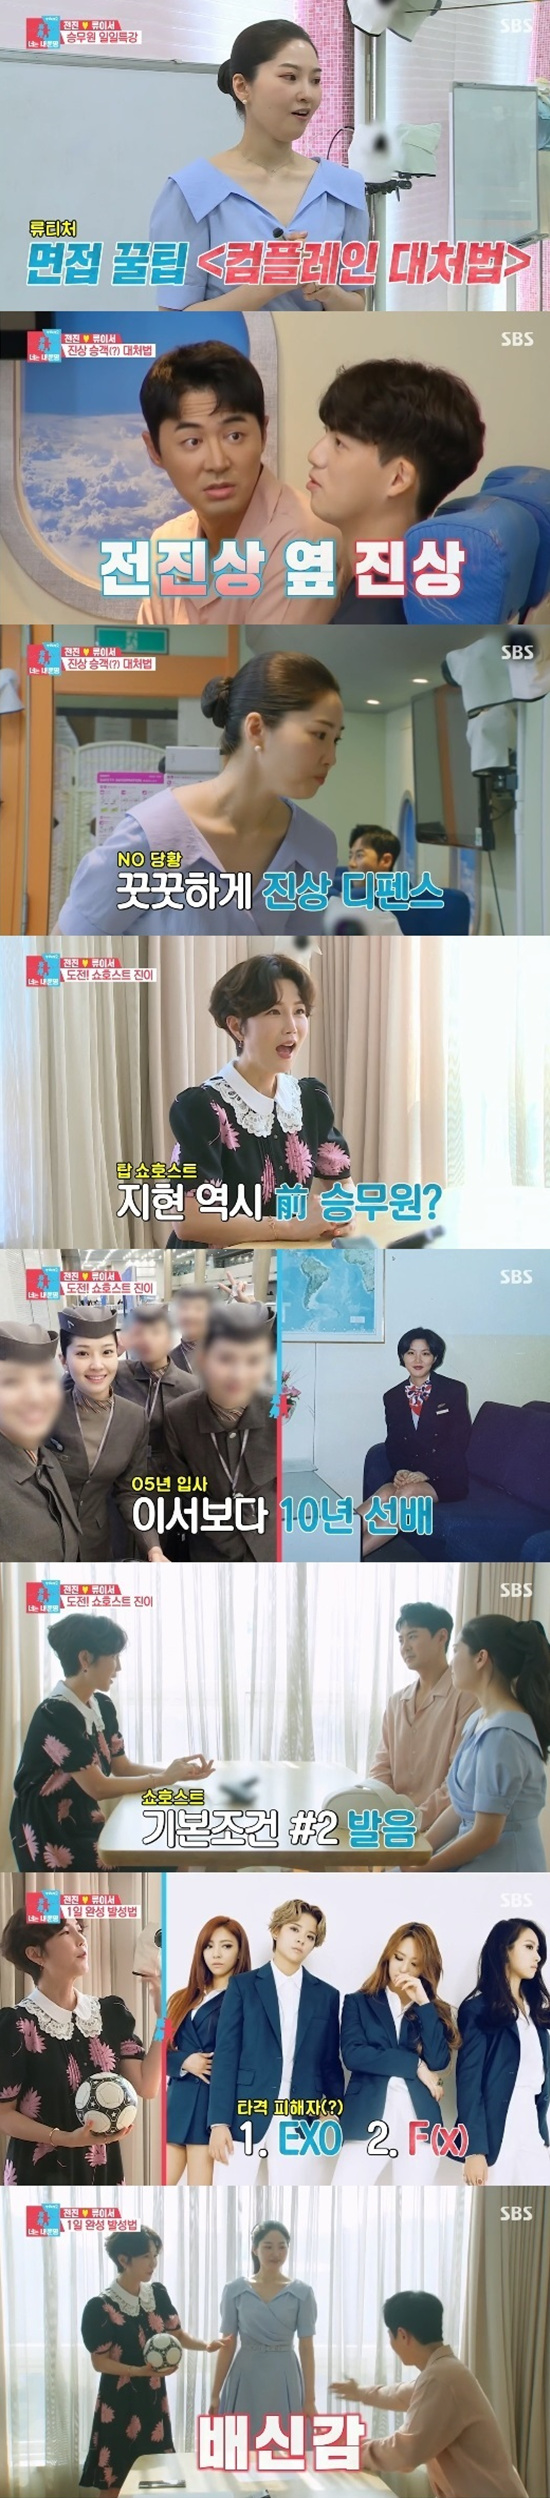 On the 9th SBS Same Bed, Different Dreams 2: You Are My Dest - You Are My Destiny, Ryu-yol Lee and Jun Jin visited the Stewardess Academy.On this day, Ryu-yool Lee visited the Stewardess Academy with Jun Jin.Stewardess Ryu-yool Lee, who has 15 years of experience, has a special day for future Stewardess.When he arrived in the waiting room, Ryu could not hide his trembling mind and prepared Stewardess signature hair once he used his head net.Jun Jin was in love with the Stewardess visuals of the Seo-yool Lee, who had not seen it in a long time.I didnt know I was going to do this, Ryu-yool Lee said, laughing.Ryu-yool Lee went into the classroom where the students were, introduced himself, and said, I am so nervous because this is the first time I have been in this position, and I will talk a lot to help your Stewardess life in the future.Ryu-yool Lee wanted to give a tip on the in-flight situational drama interview that the aspiring Stewardess is the most difficult.Ryu-yool Lee told me that listening, empathy and apology, problem solving, and reaffirmation are important in terms of how to deal with passenger complaints.Ryu-yool Lee has launched a demonstration of complacent coping against her husband Jun Jin, who was divided into passengers to show her the process she explained.Jun Jin has started Acting intoxicated, in-flight Complane passengers.Ryu-yool Lee also showed a smile on Jun Jins fact-finding and solving the complain.Jun Jin and Ryu Seo-yool Lee met show host Dong Ji-hyun; Jun Jin is about to air a home shopping show.Dong Ji-hyun told Jun Jin and Ryu Seo-yool Lee that the show host wanted to test the speech on the spot, informing them that voice, pronunciation, speech speed, and gesture were important.Dong Ji-hyun asked Jun Jin to talk to him about the topic of Seo-yool Lee for a minute.Jun Jin tried his best, but there were only four problems pointed out by Dong Ji-hyun.Dong Ji-hyun said of Jun Jins speech: When you speak, you need a pause; too many sentences continue to come out and the words are very fast.Uh, yes, he said, I use it often. I raise the end of the horse.Dong Ji-hyun has taken out a handball for breathing and vocal practice.I hit a lot of stars on the boat, said Dong Ji-hyun, explaining that he brought a handball ball for double breathing.If you do not get sick, you have to give strength to the ship. Jun Jin and Seo-yool Lee hit the boat with a handball ball and showed a feeling of embarrassment.Jun Jin went into practice training after only turning off the candles by sound following the handball ball: Cheese Dongas was set up.Dong Ji-hyun advised Jun Jin to communicate with the camera, giving a lead.Jun Jin said that the short-term attributes of Dong Ji-hyun made the actual home shopping broadcasts well, and Jun Jins home shopping broadcast video was released and attracted attention.Photo: SBS broadcast screen